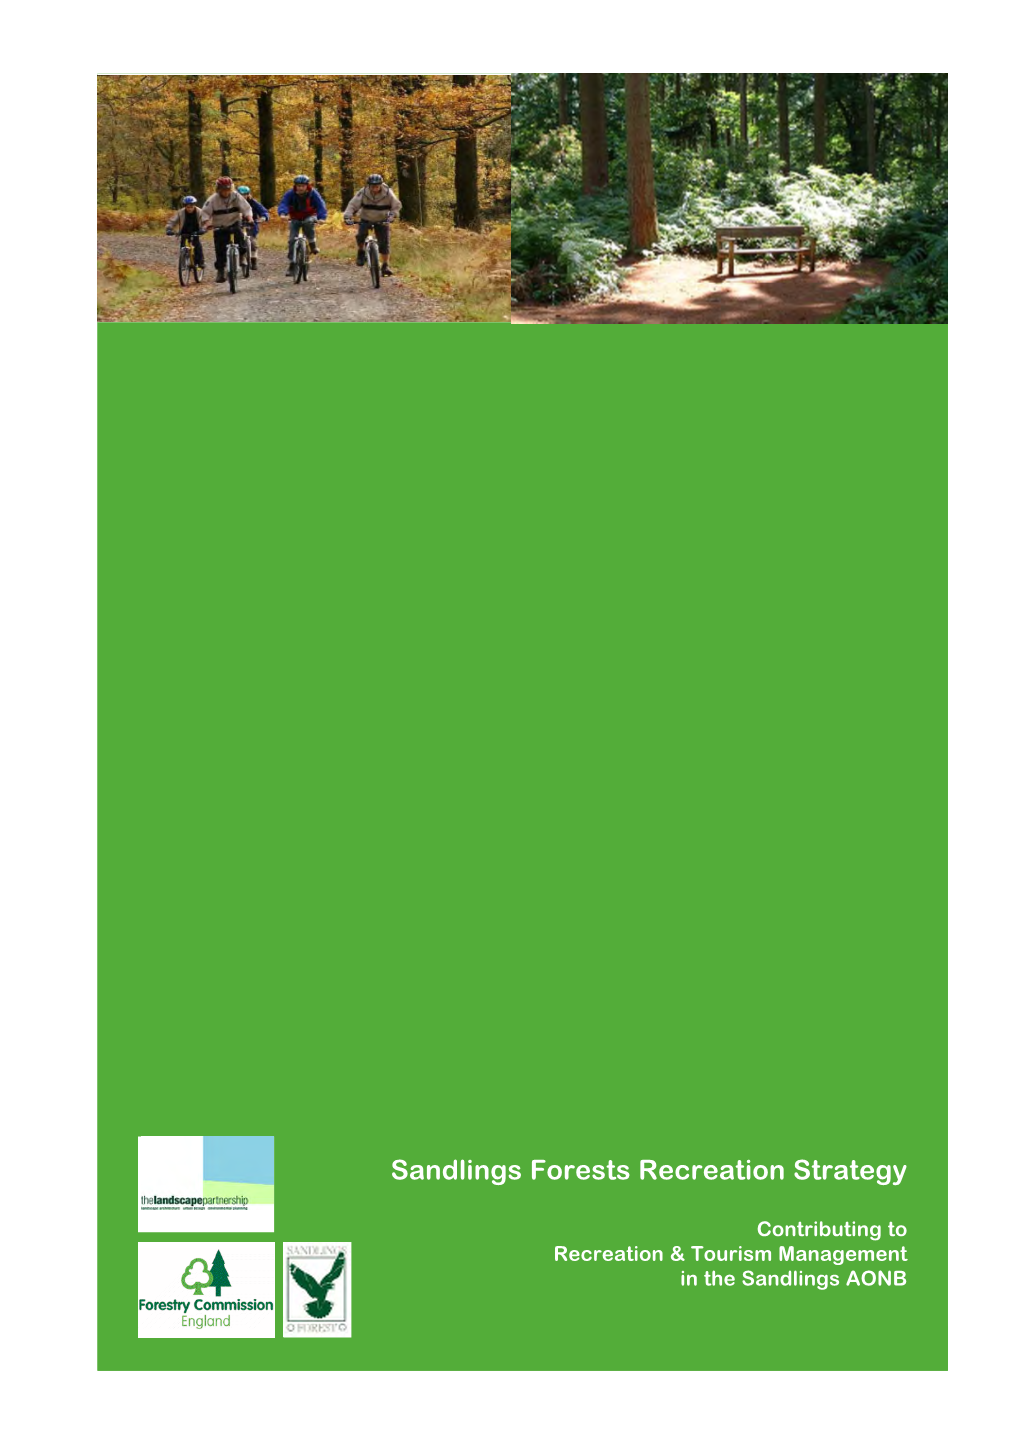 Forestry Commission (FC) Believes to Be the Most Appropriate Future for Public Access Provision Across the Sandlings Forests